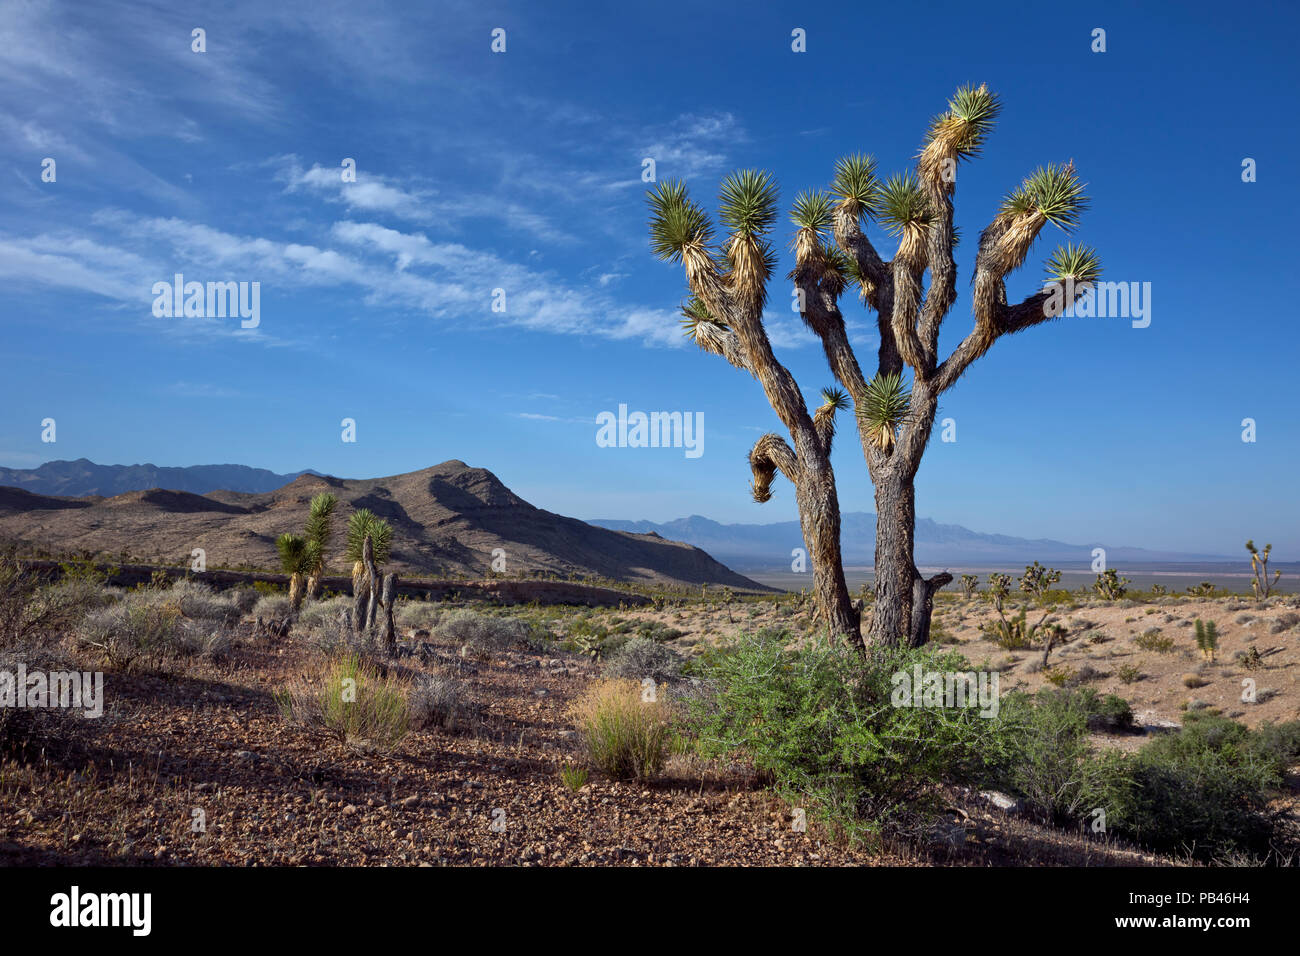 UT00491-00...UTAH - A Joshua tree in the  Woodbury Desert Study Area, part of the Beaver Dam Wash National Conservation Area on the edge of the Mojave Stock Photo